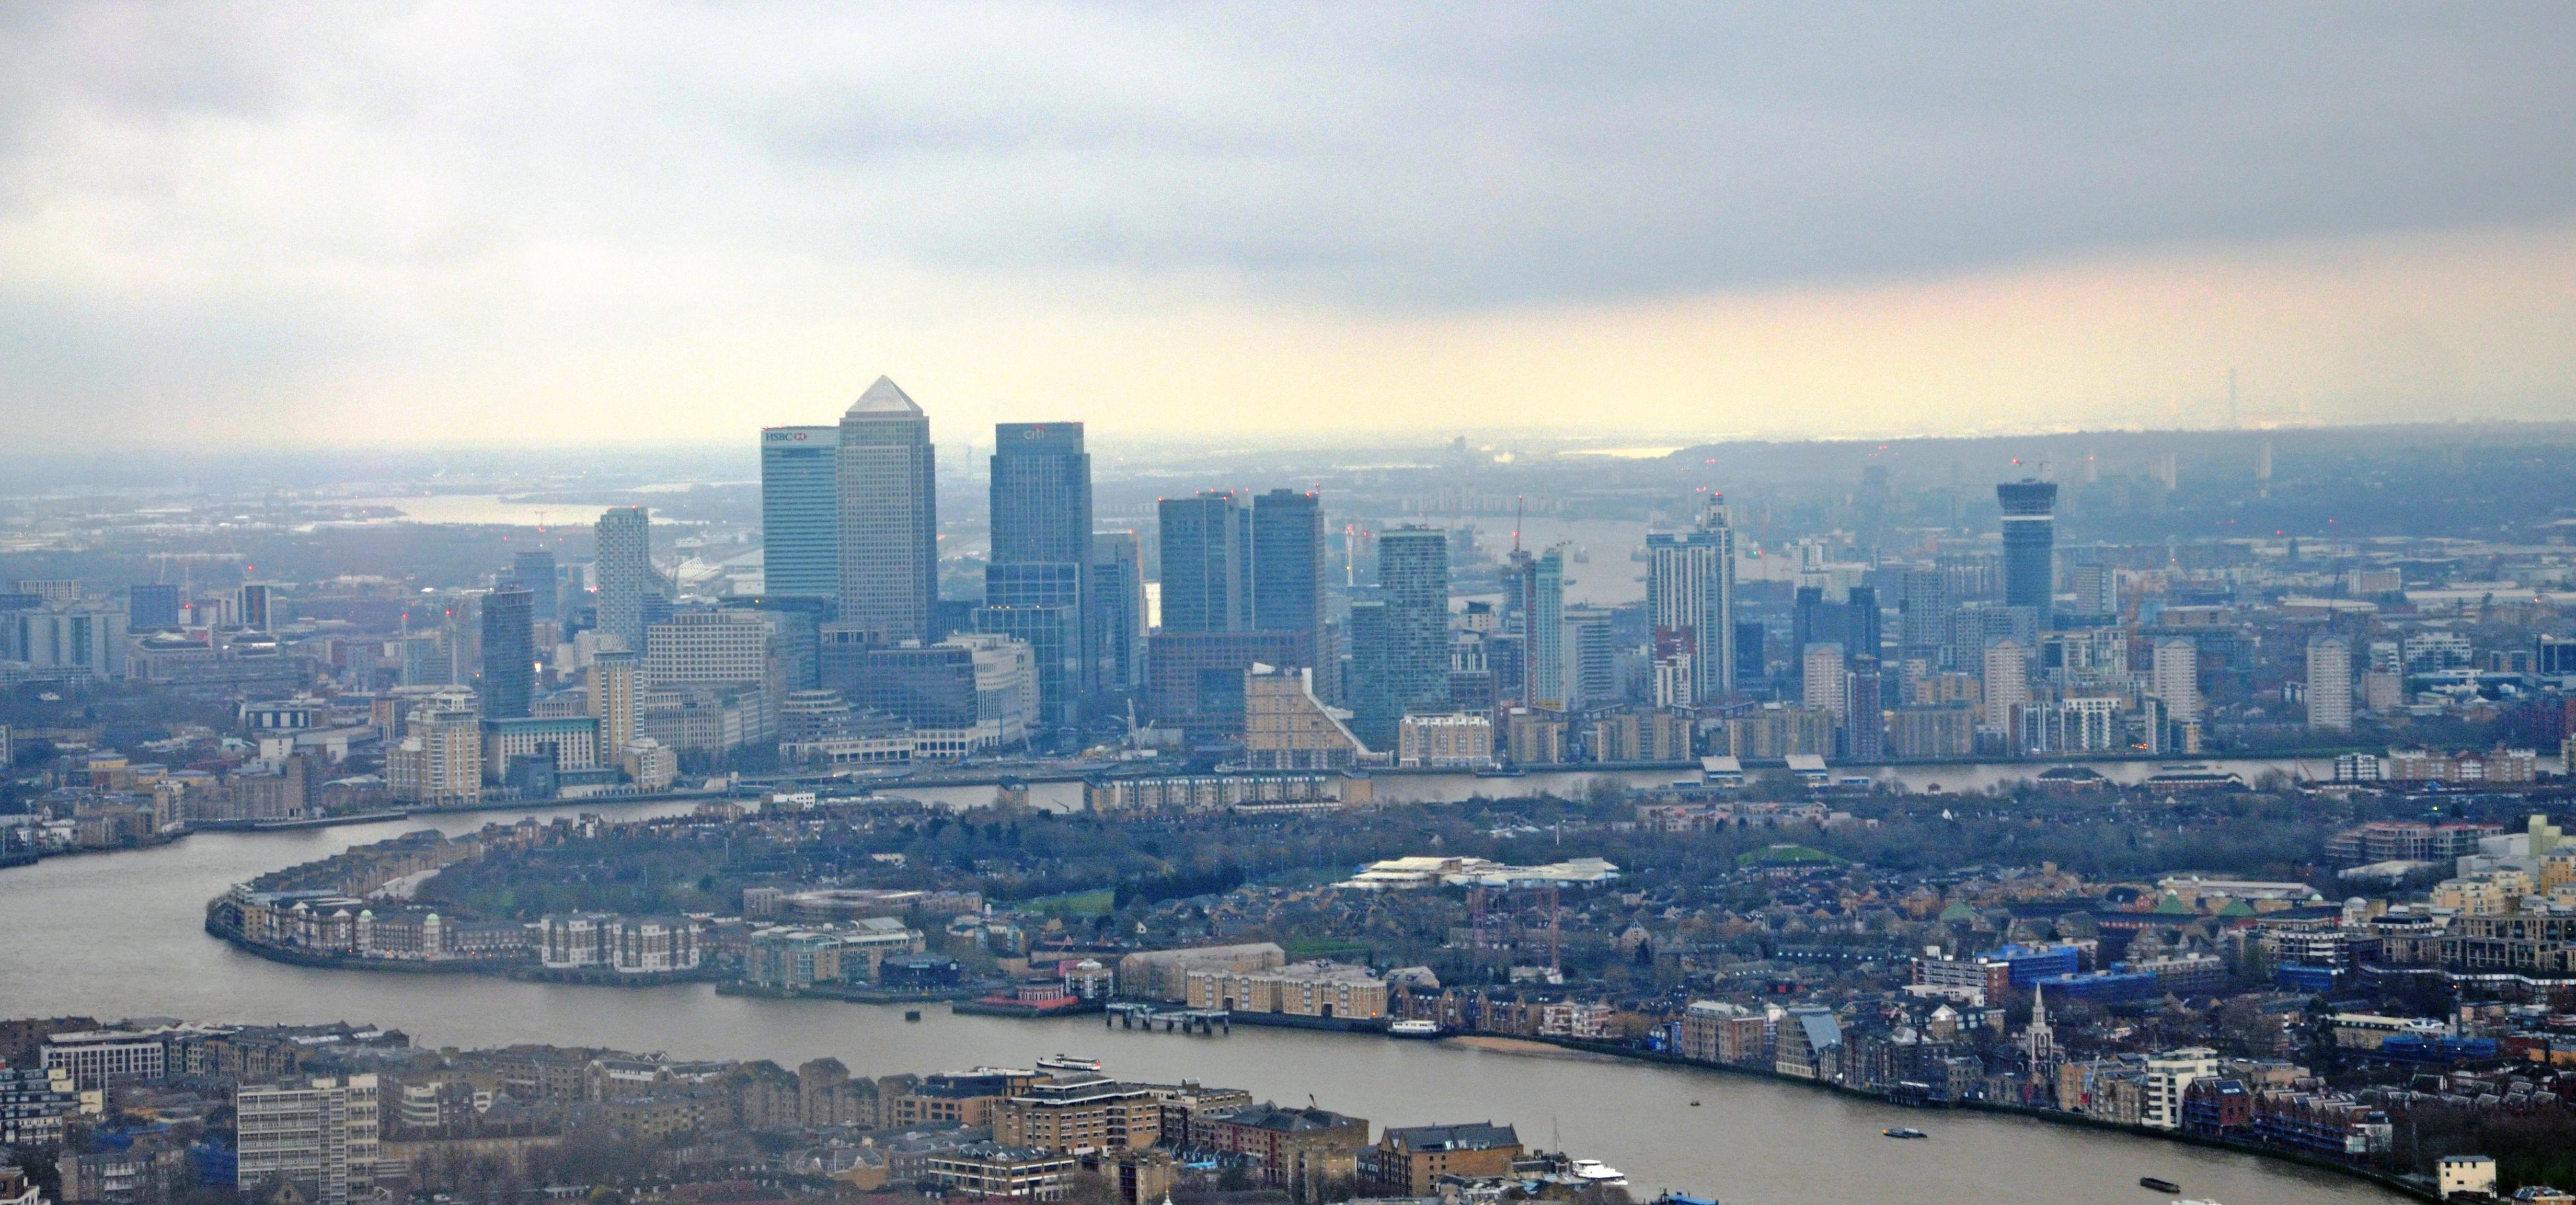 Docklands from the Shard